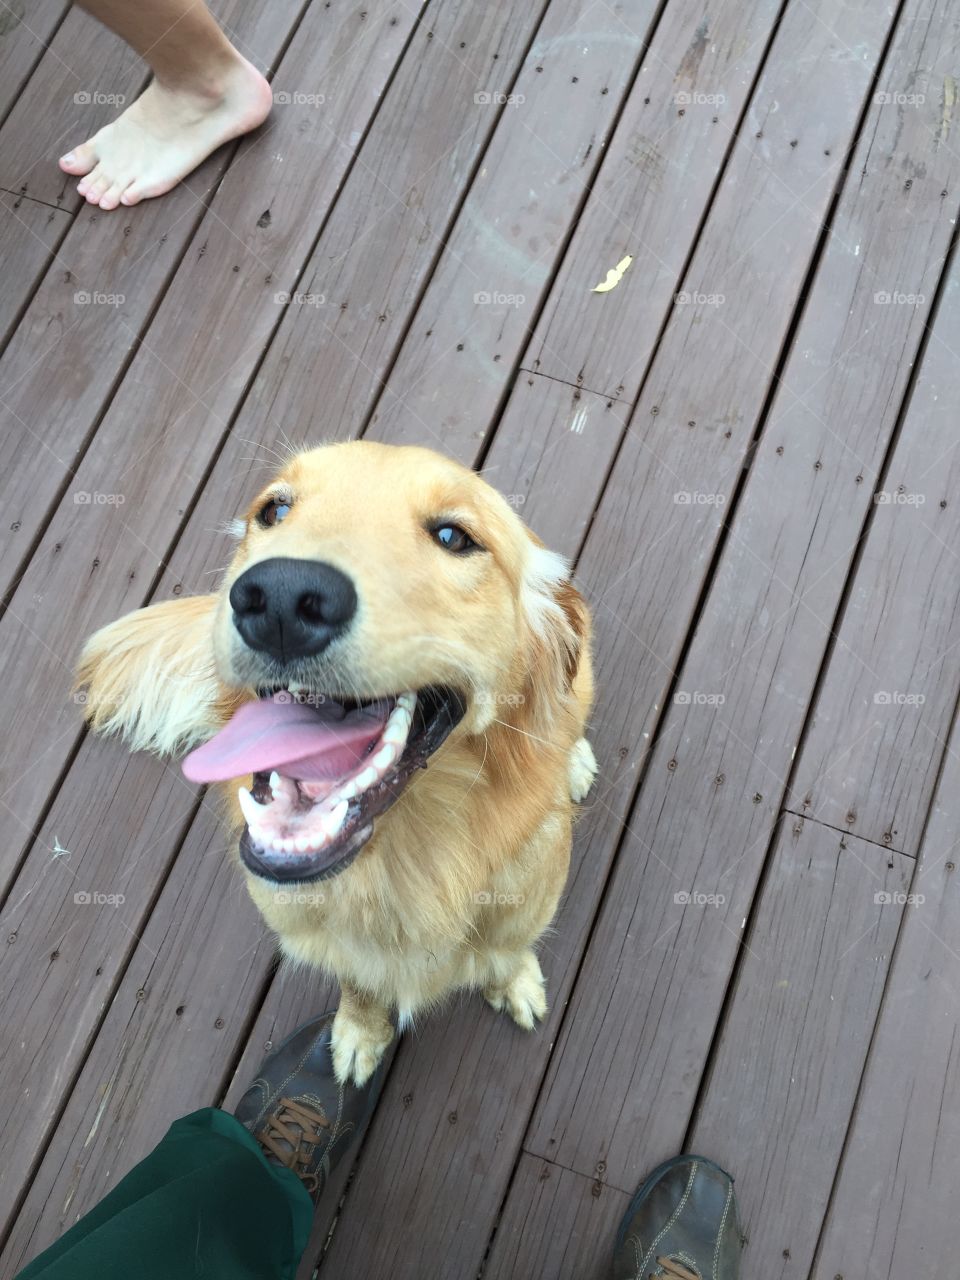 At the in laws. She was super happy to be running around with us in the morning!